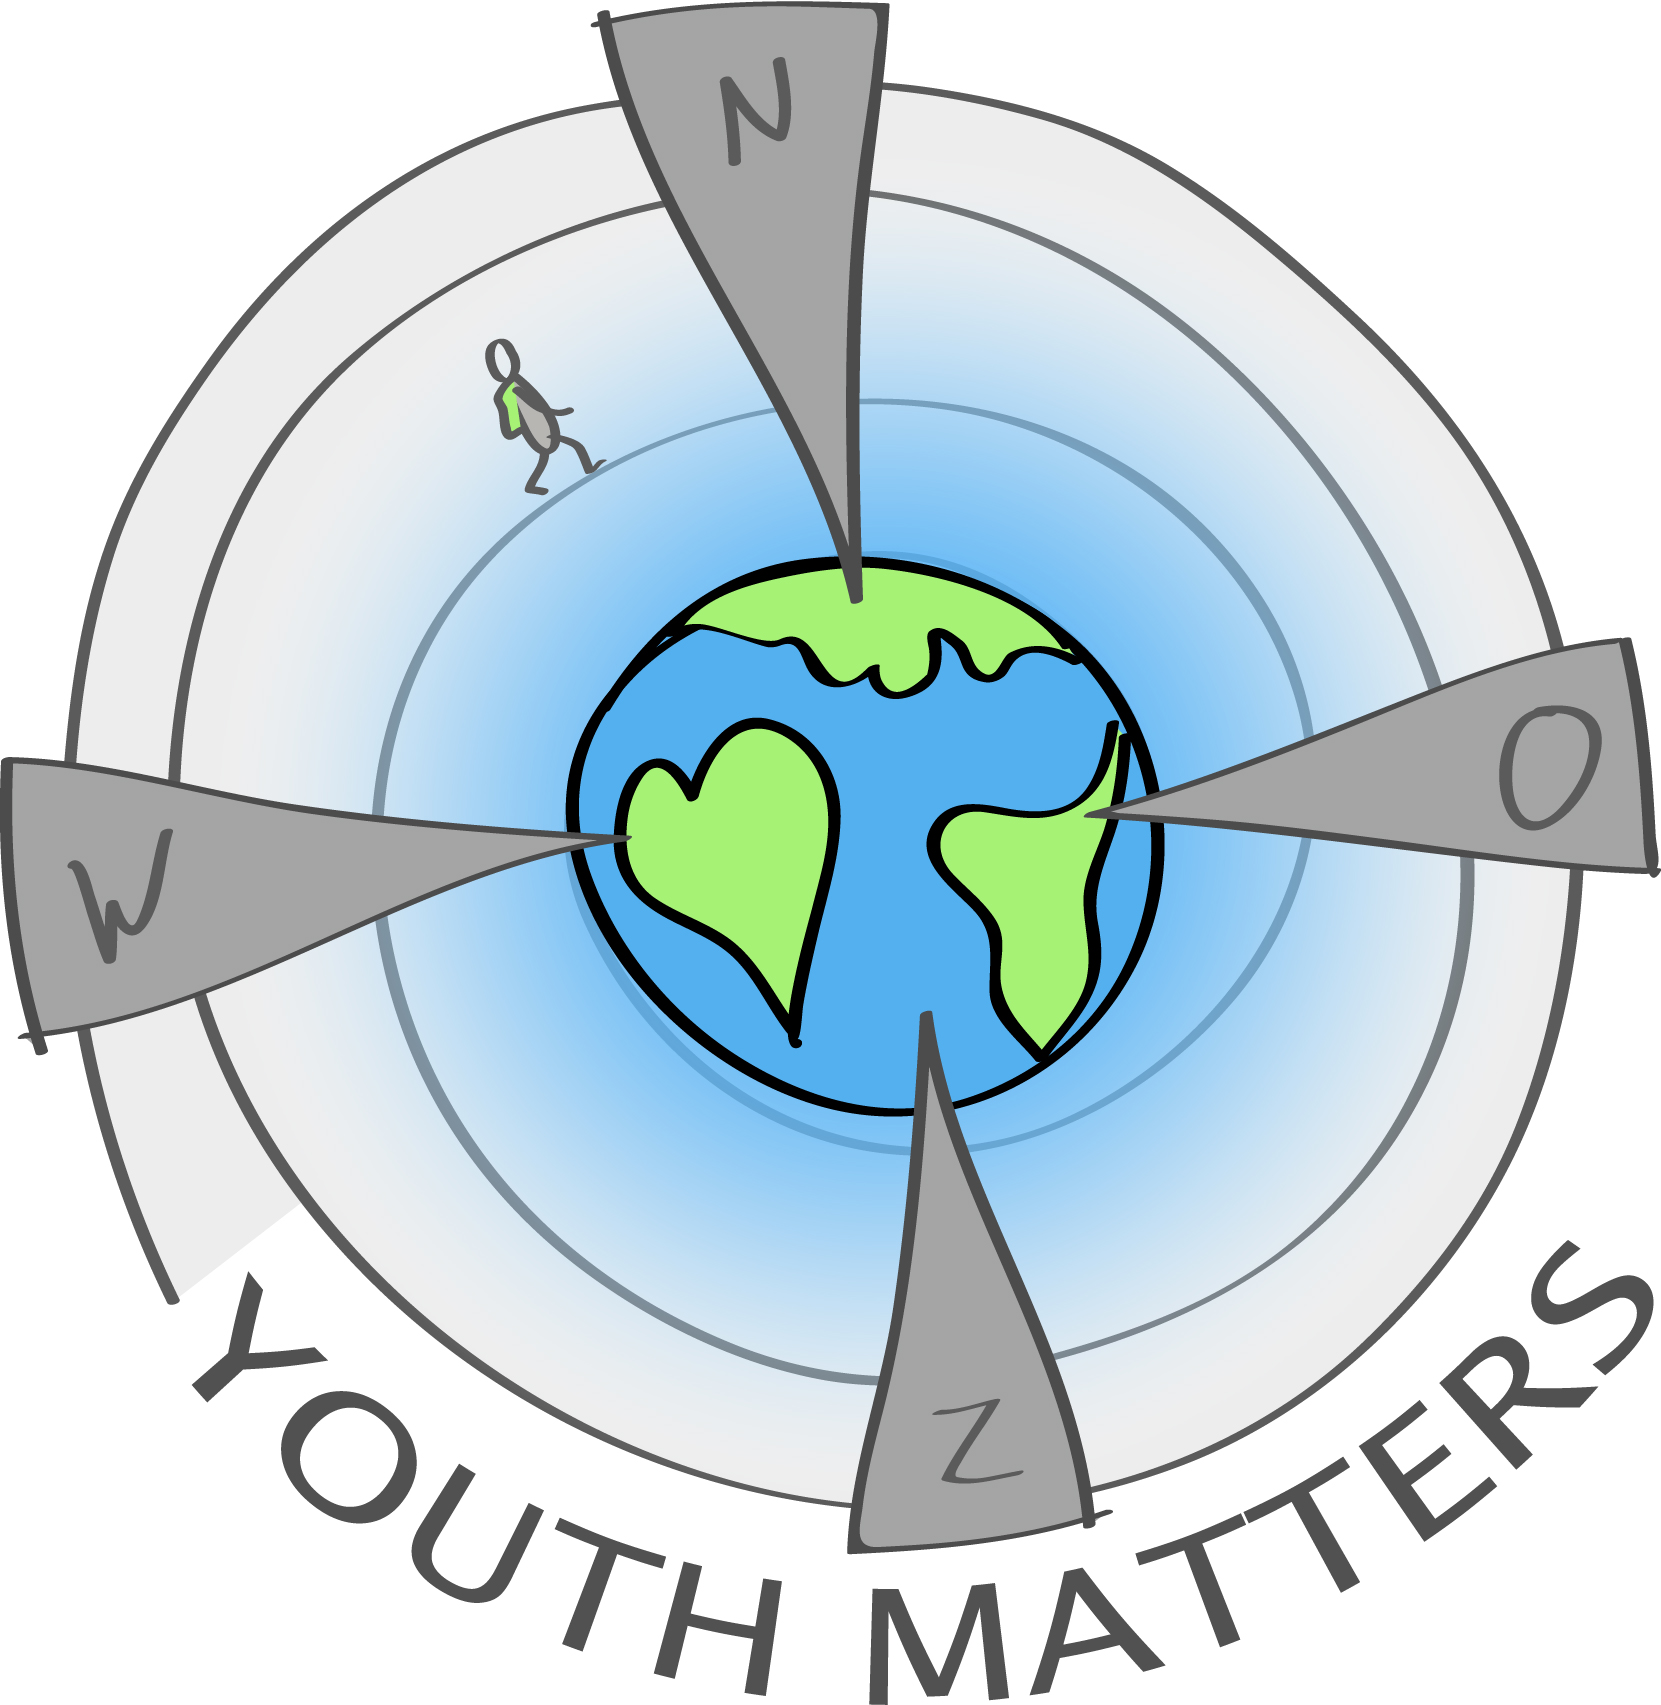 Youth Matters